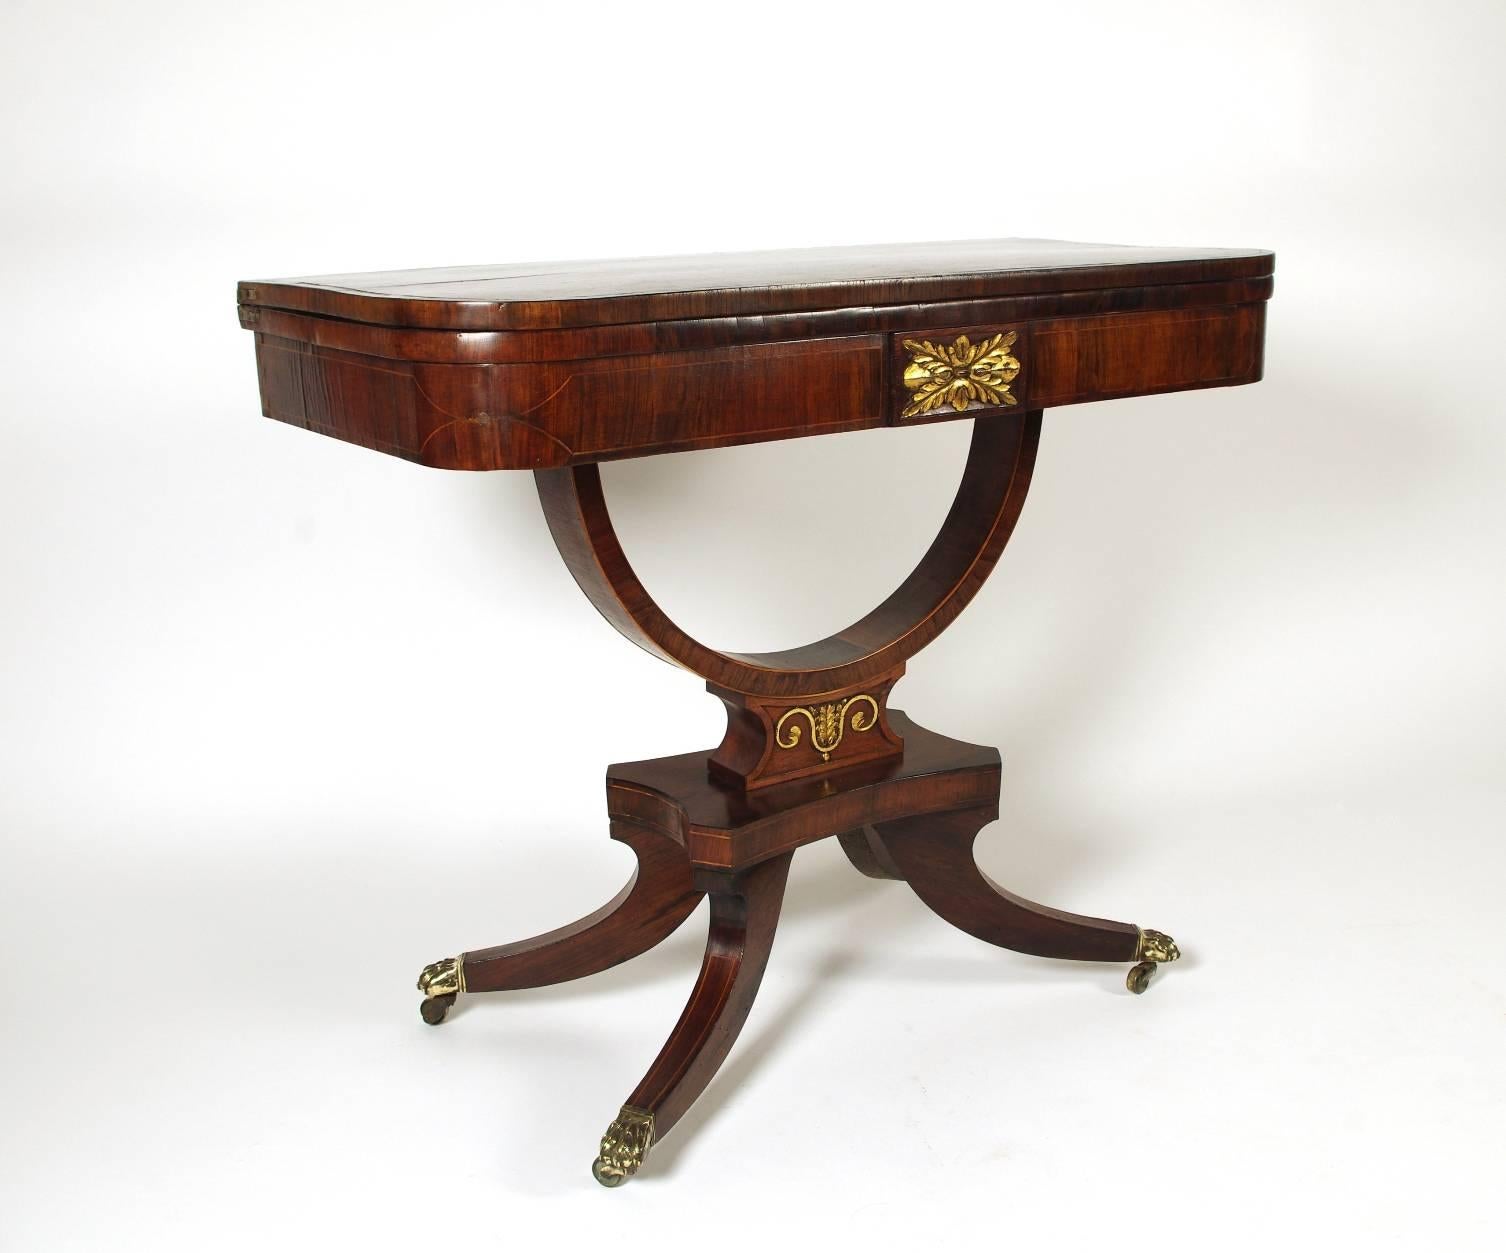 English Regency Rosewood Fold over Card Table with Rare Palm Cross Banding